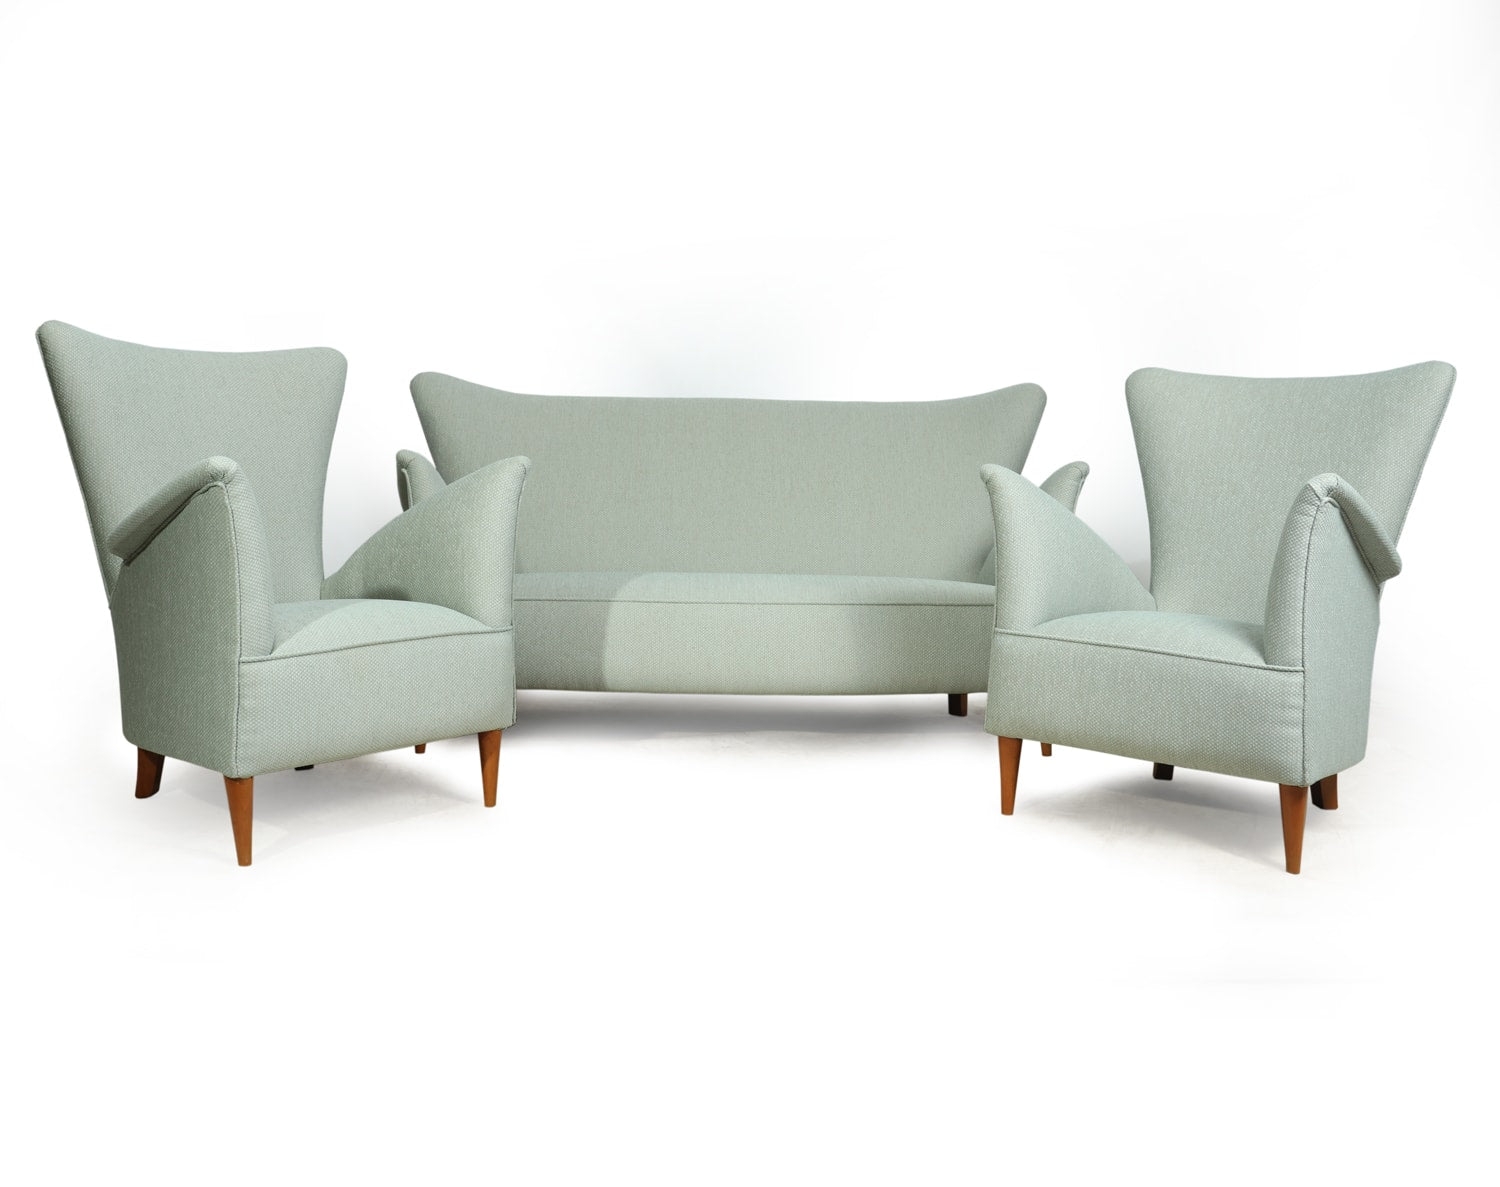 Armchairs and Sofa By Gio Ponti c1954 – The Furniture Rooms